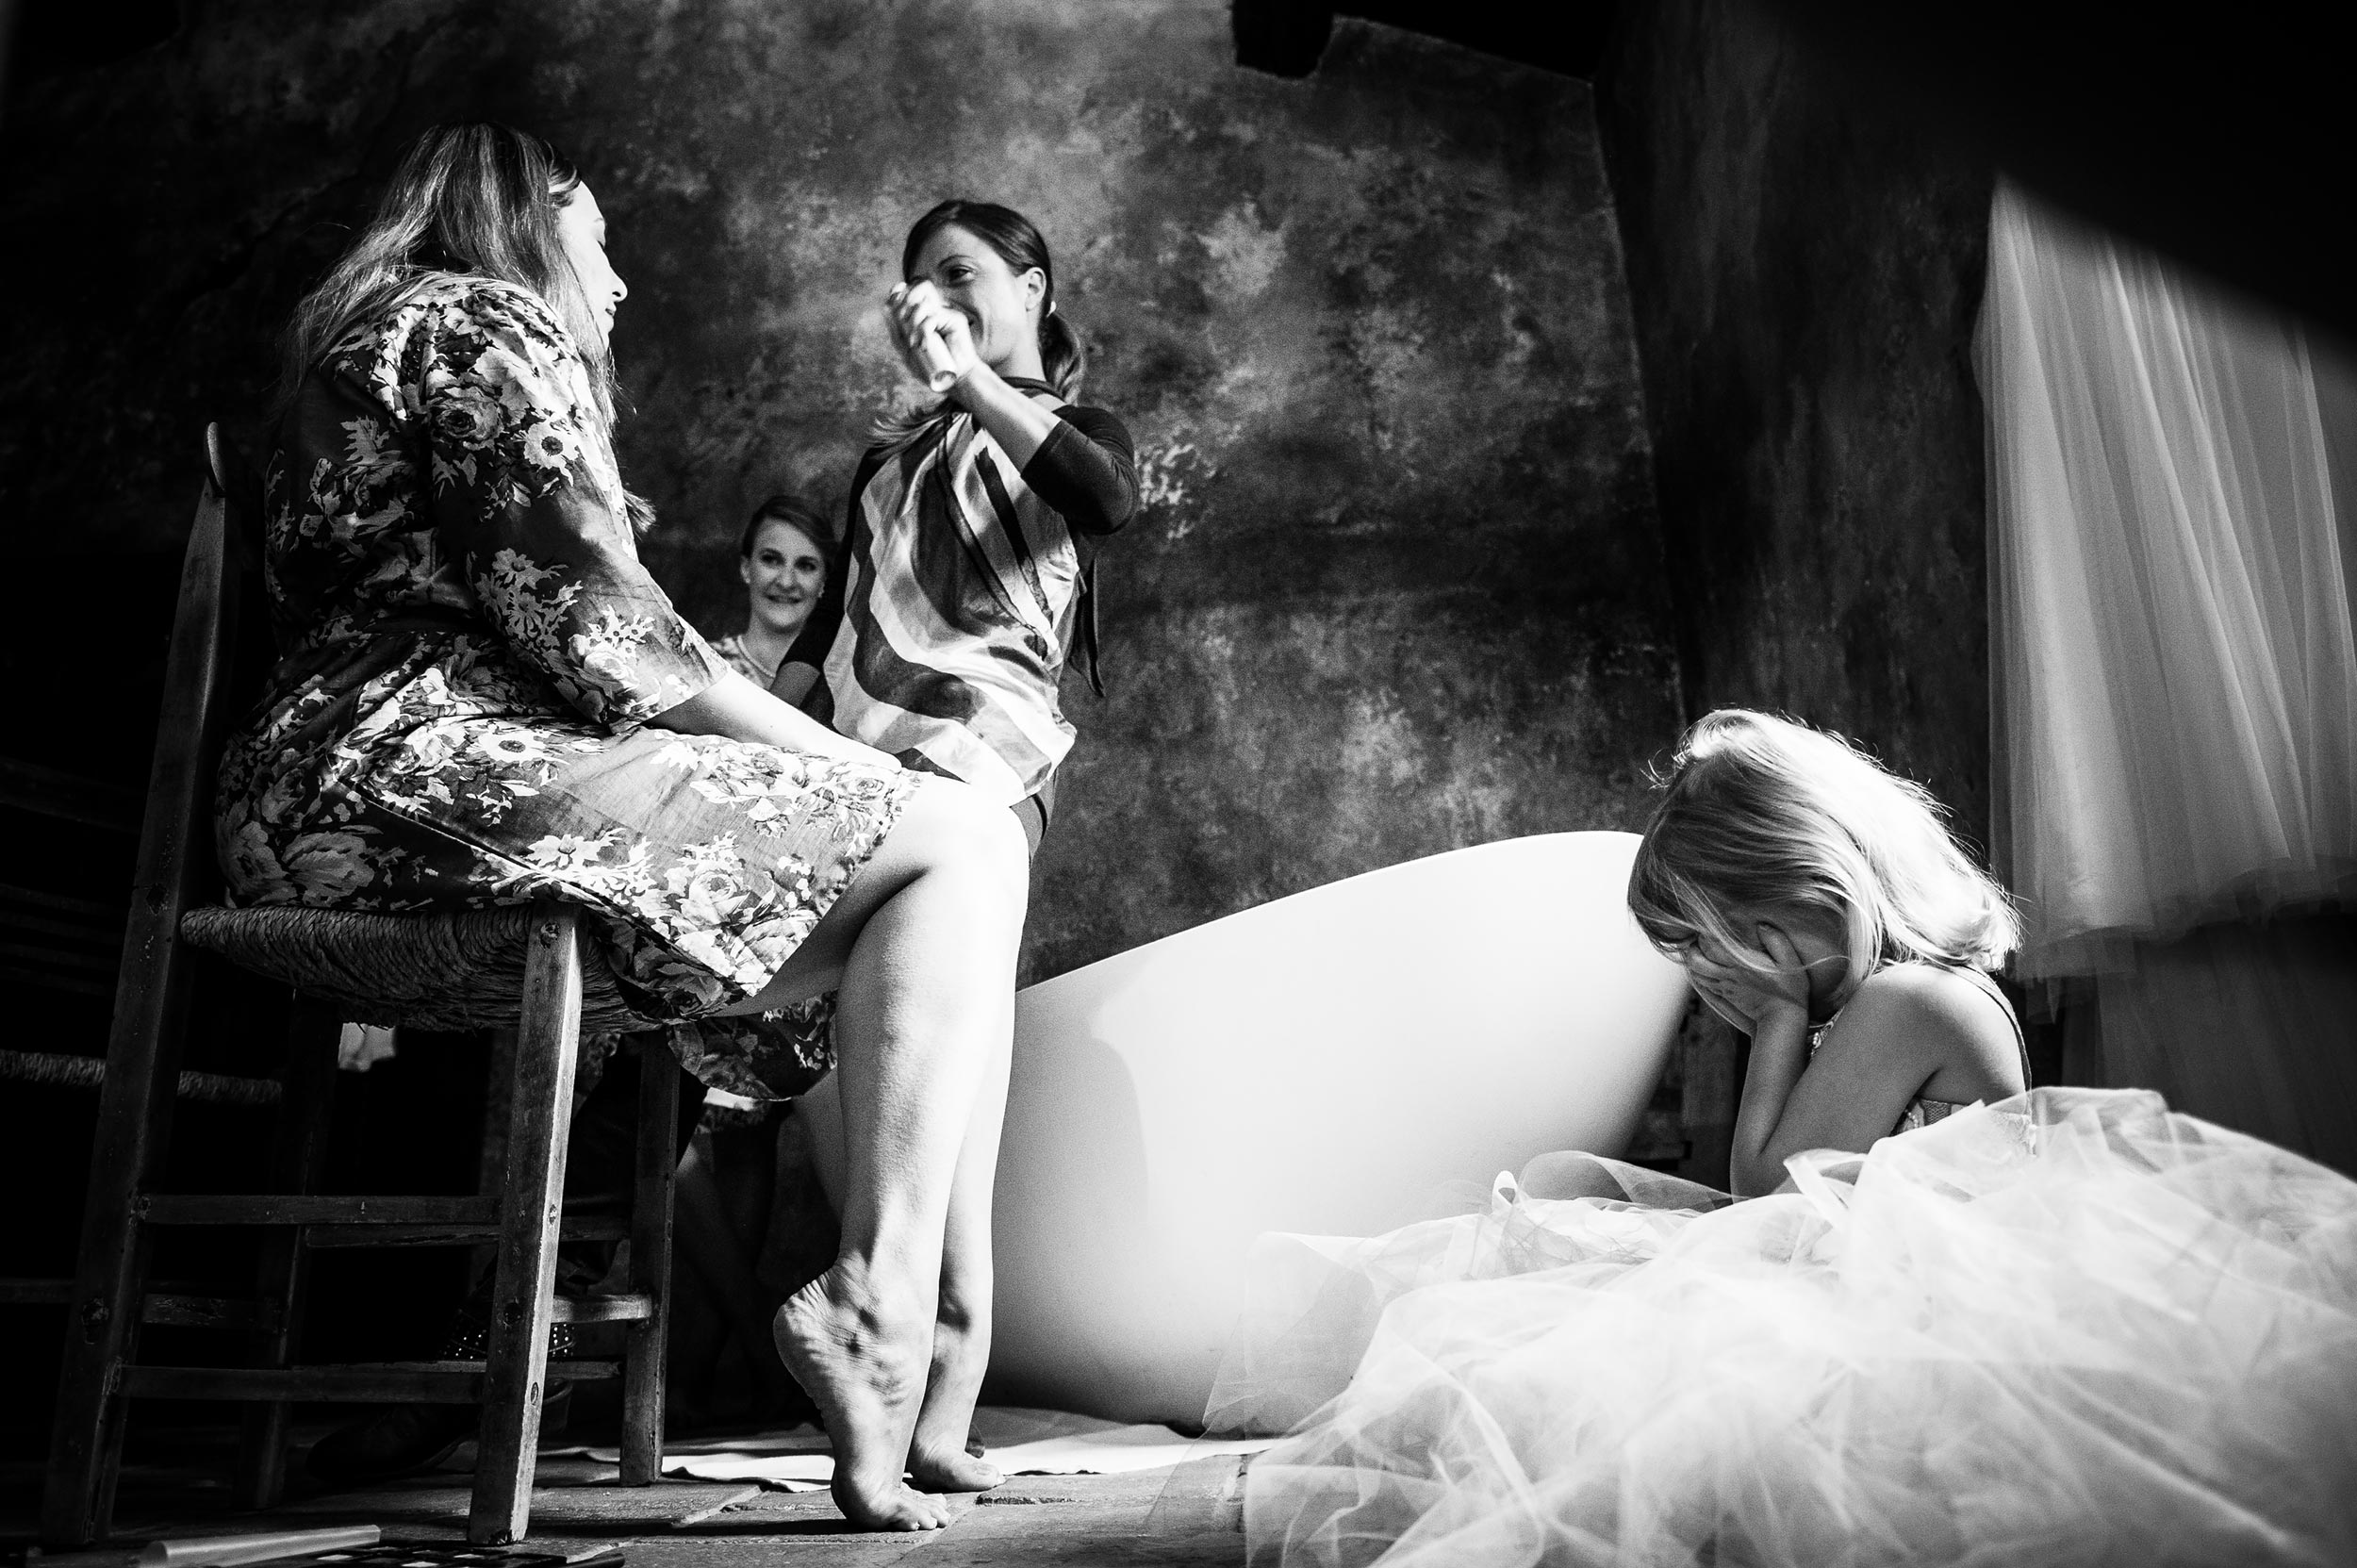 girl-puts-her-hands-on-her-face-while-mom-get-sprayed-during-getting-ready-black-and-white-wedding-photography.jpg